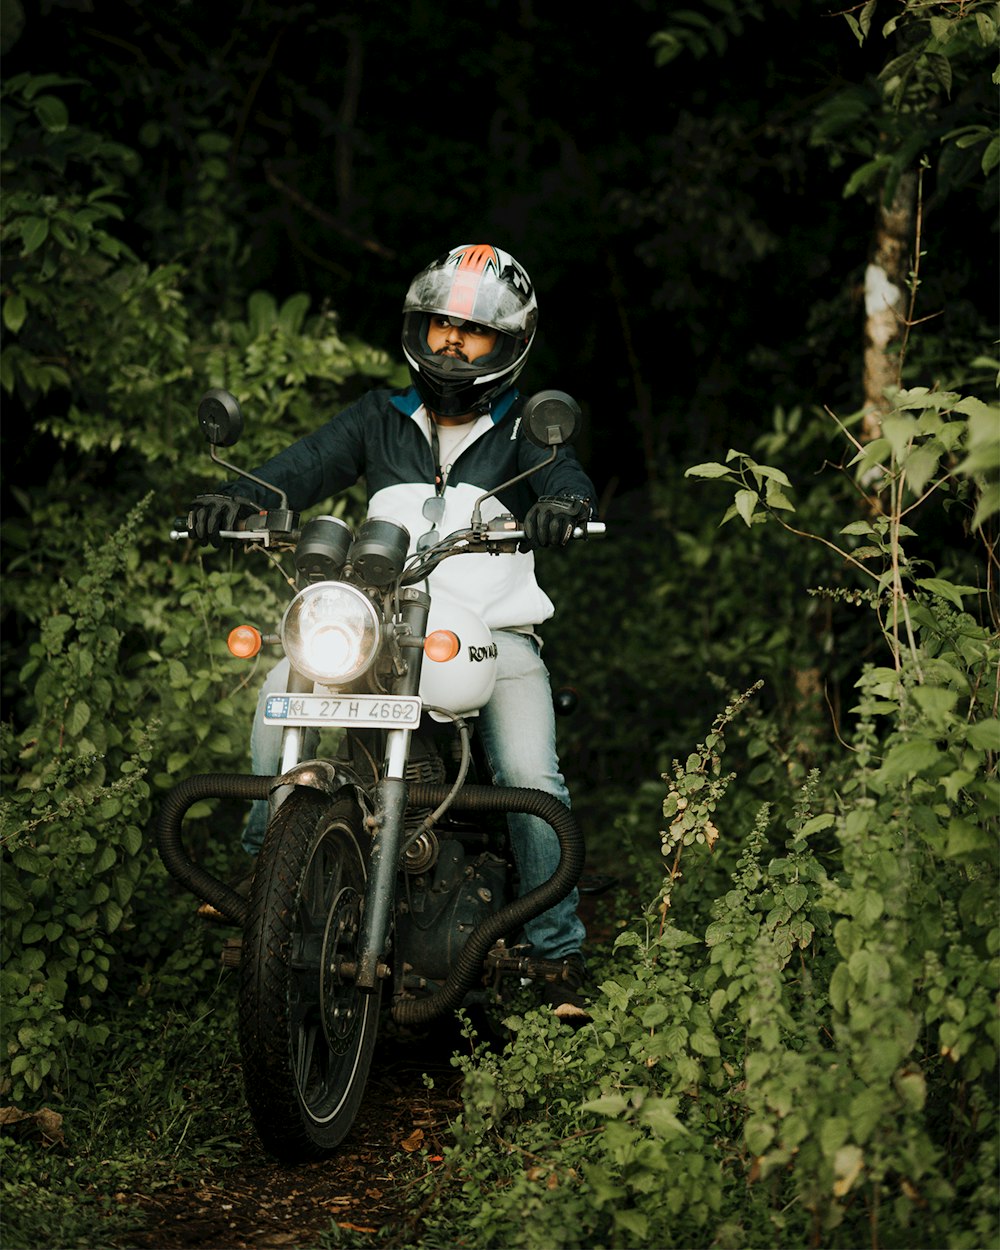 a man riding on the back of a motorcycle through a forest